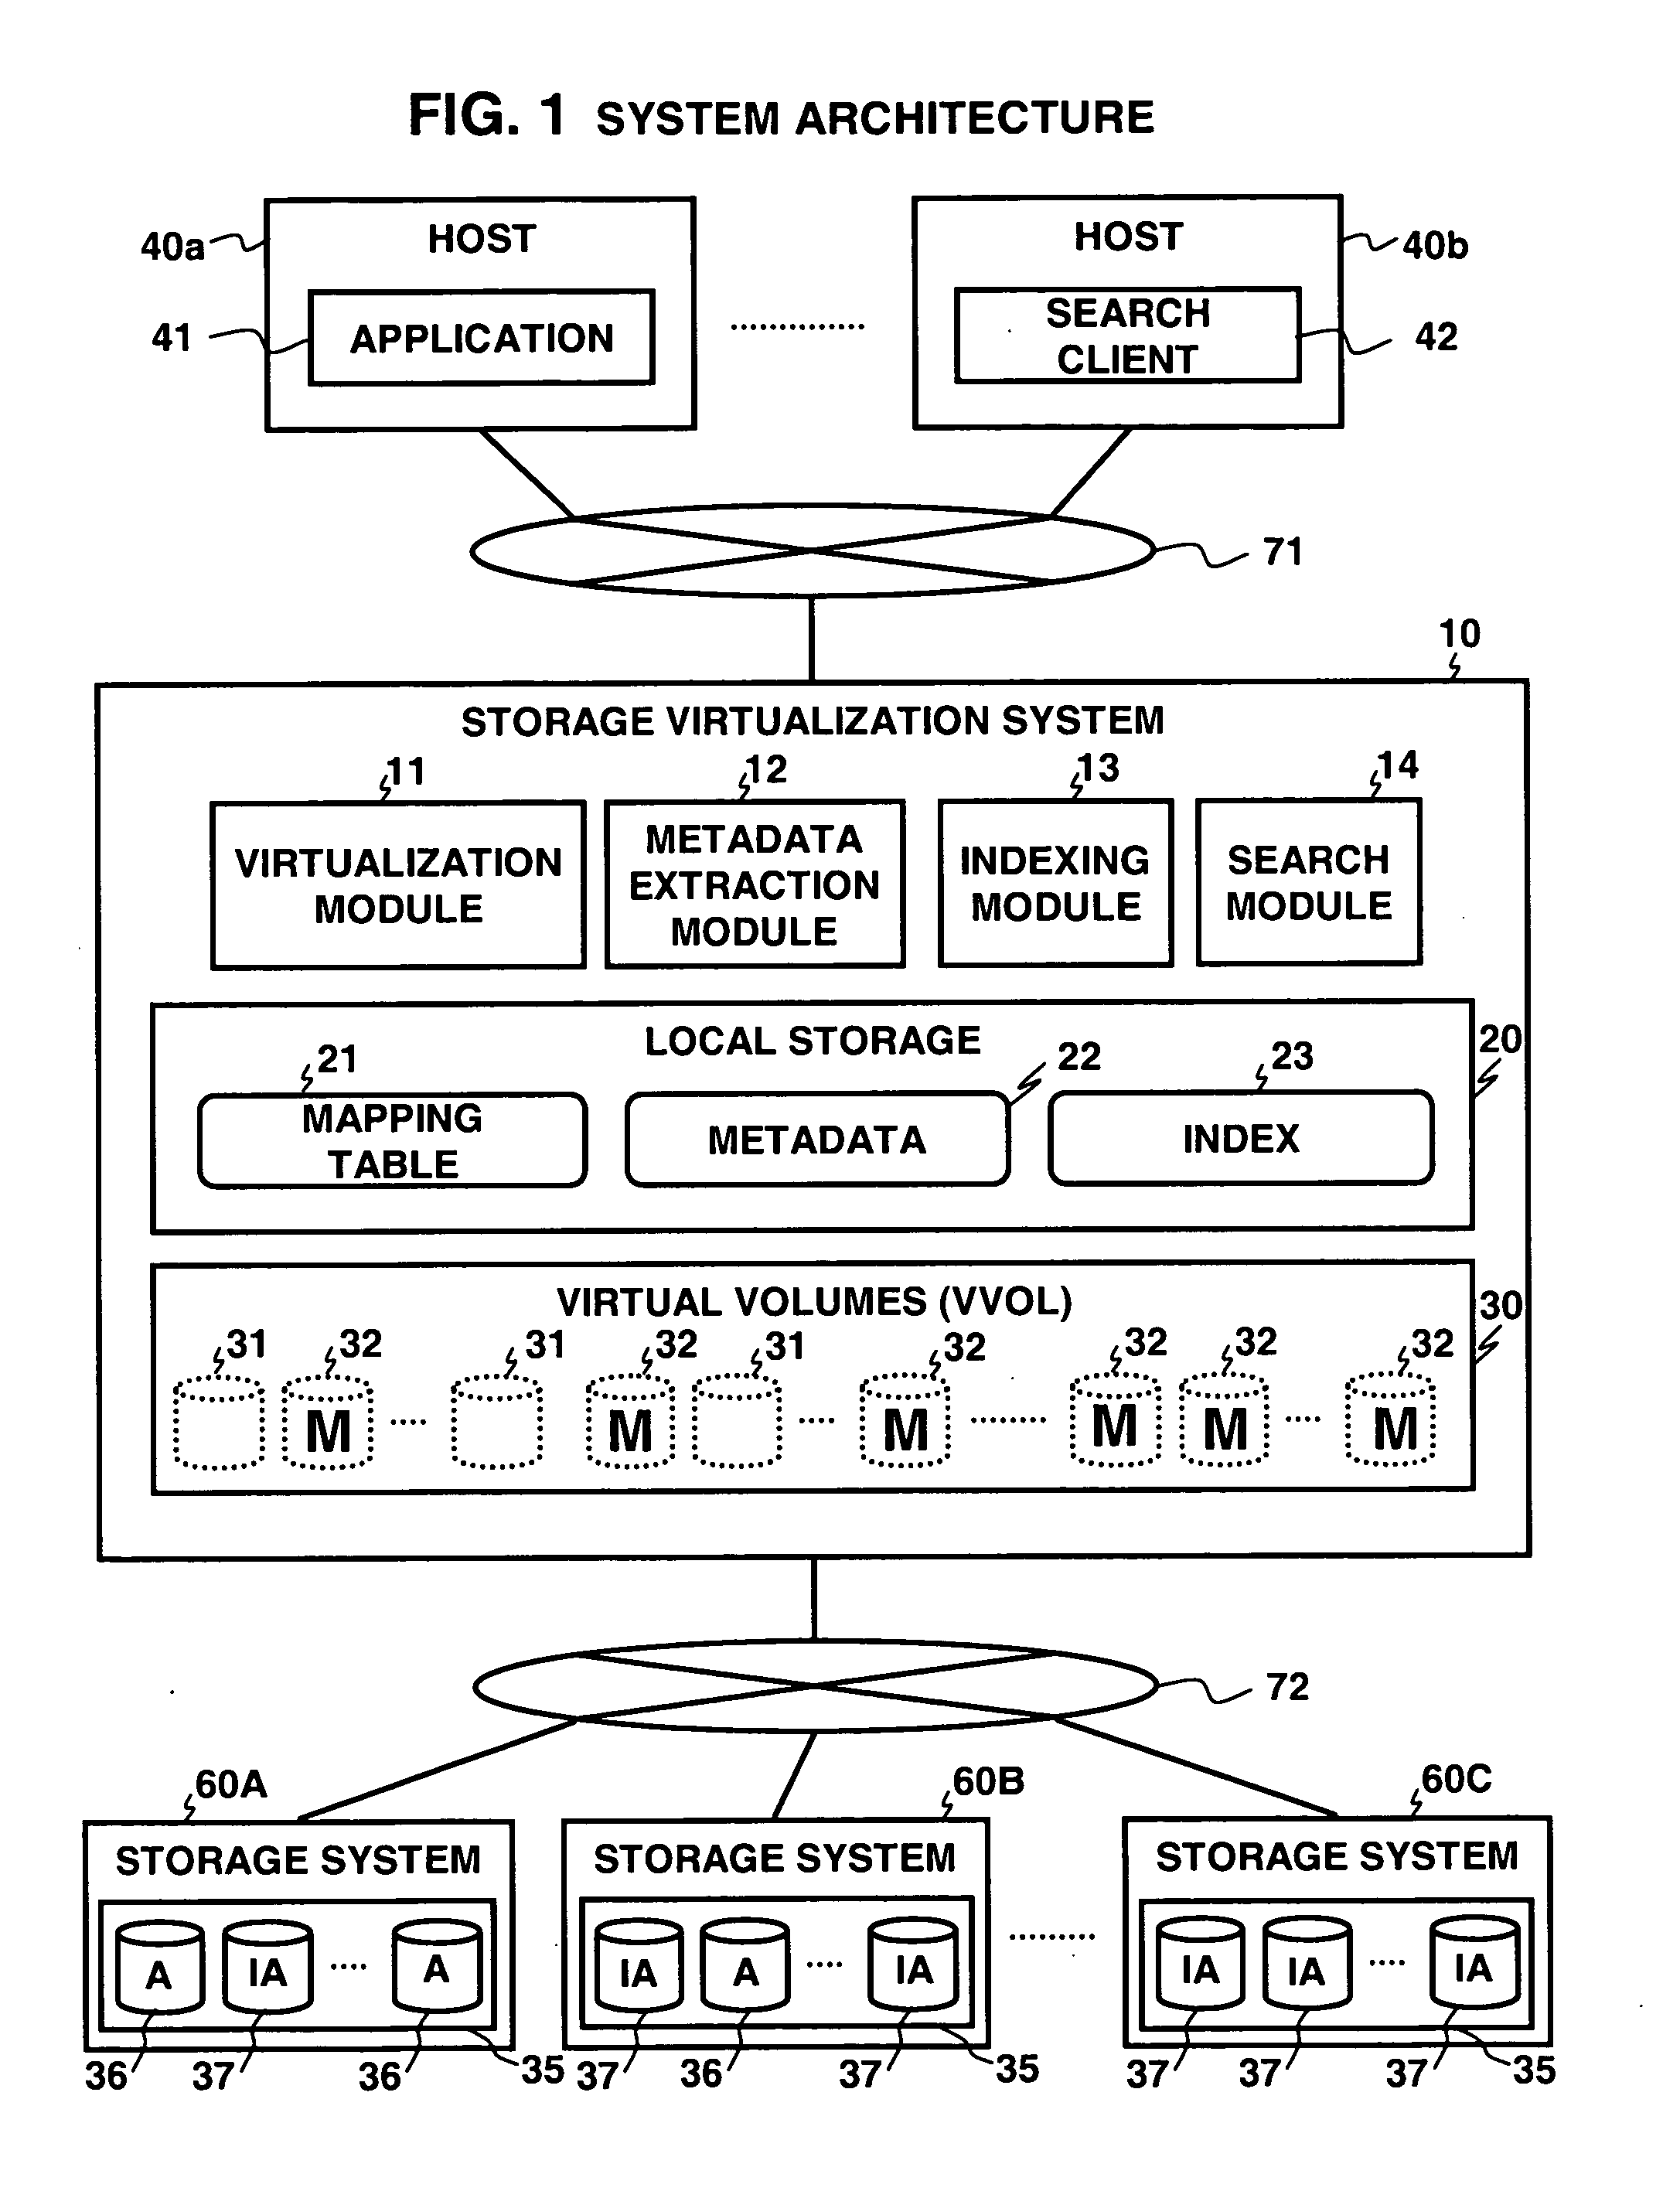 Apparatus, system and method incorporating virtualization for data storage